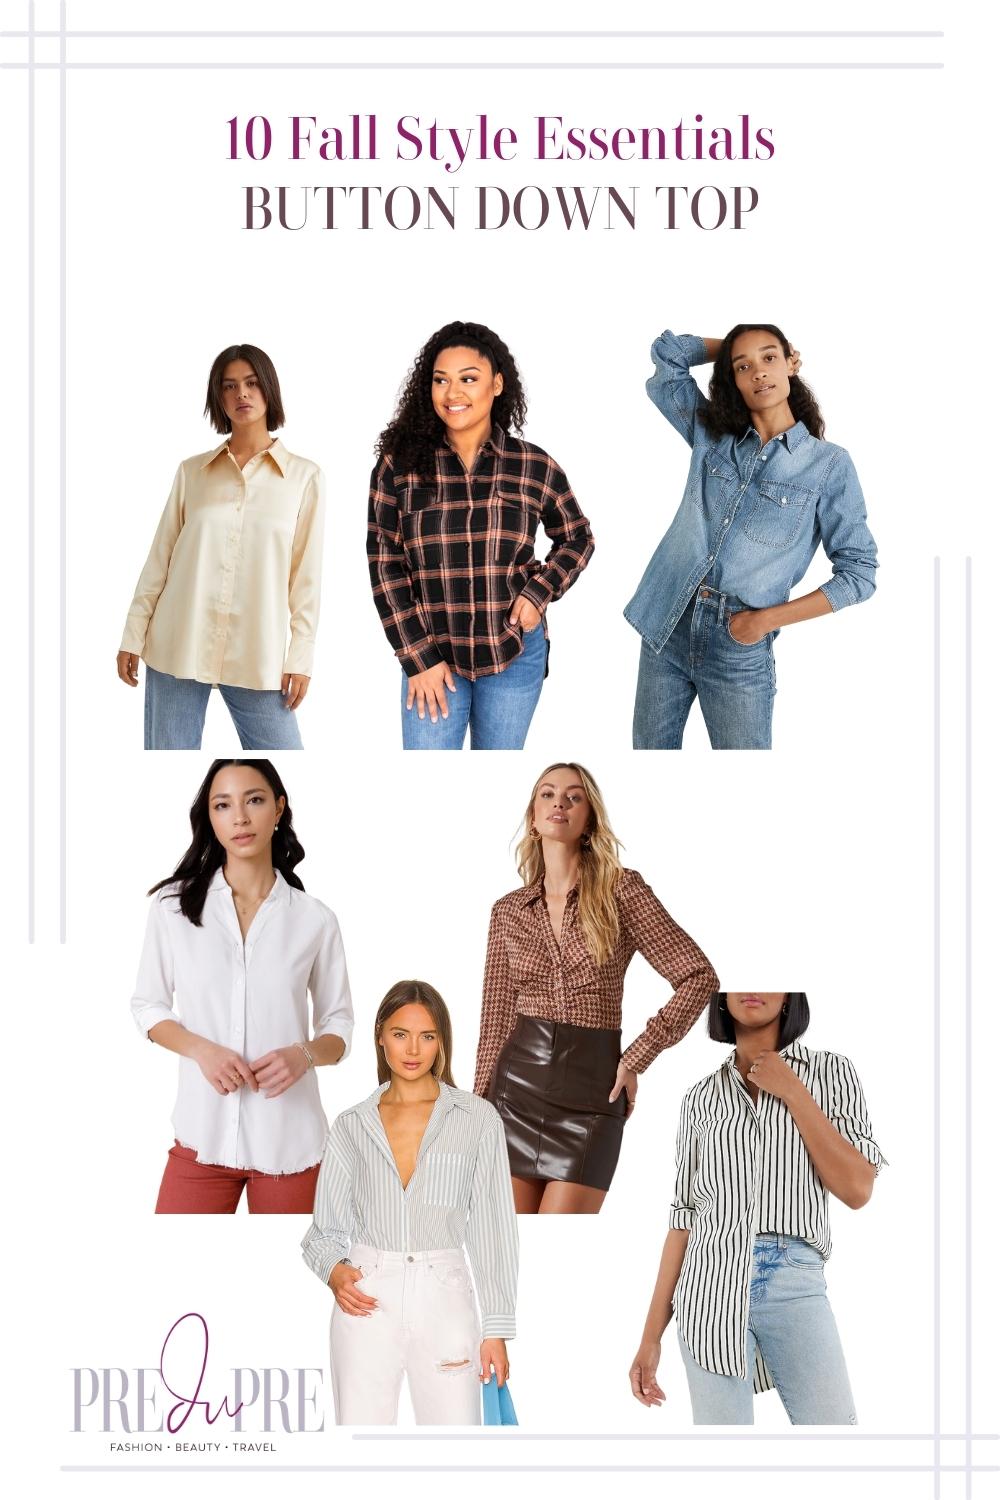 Collage of different button down tops. From clockwise: beige satin top, black plaid top, chambray top, black and white striped top, brown checkered top, light grey blue striped top, and white top.